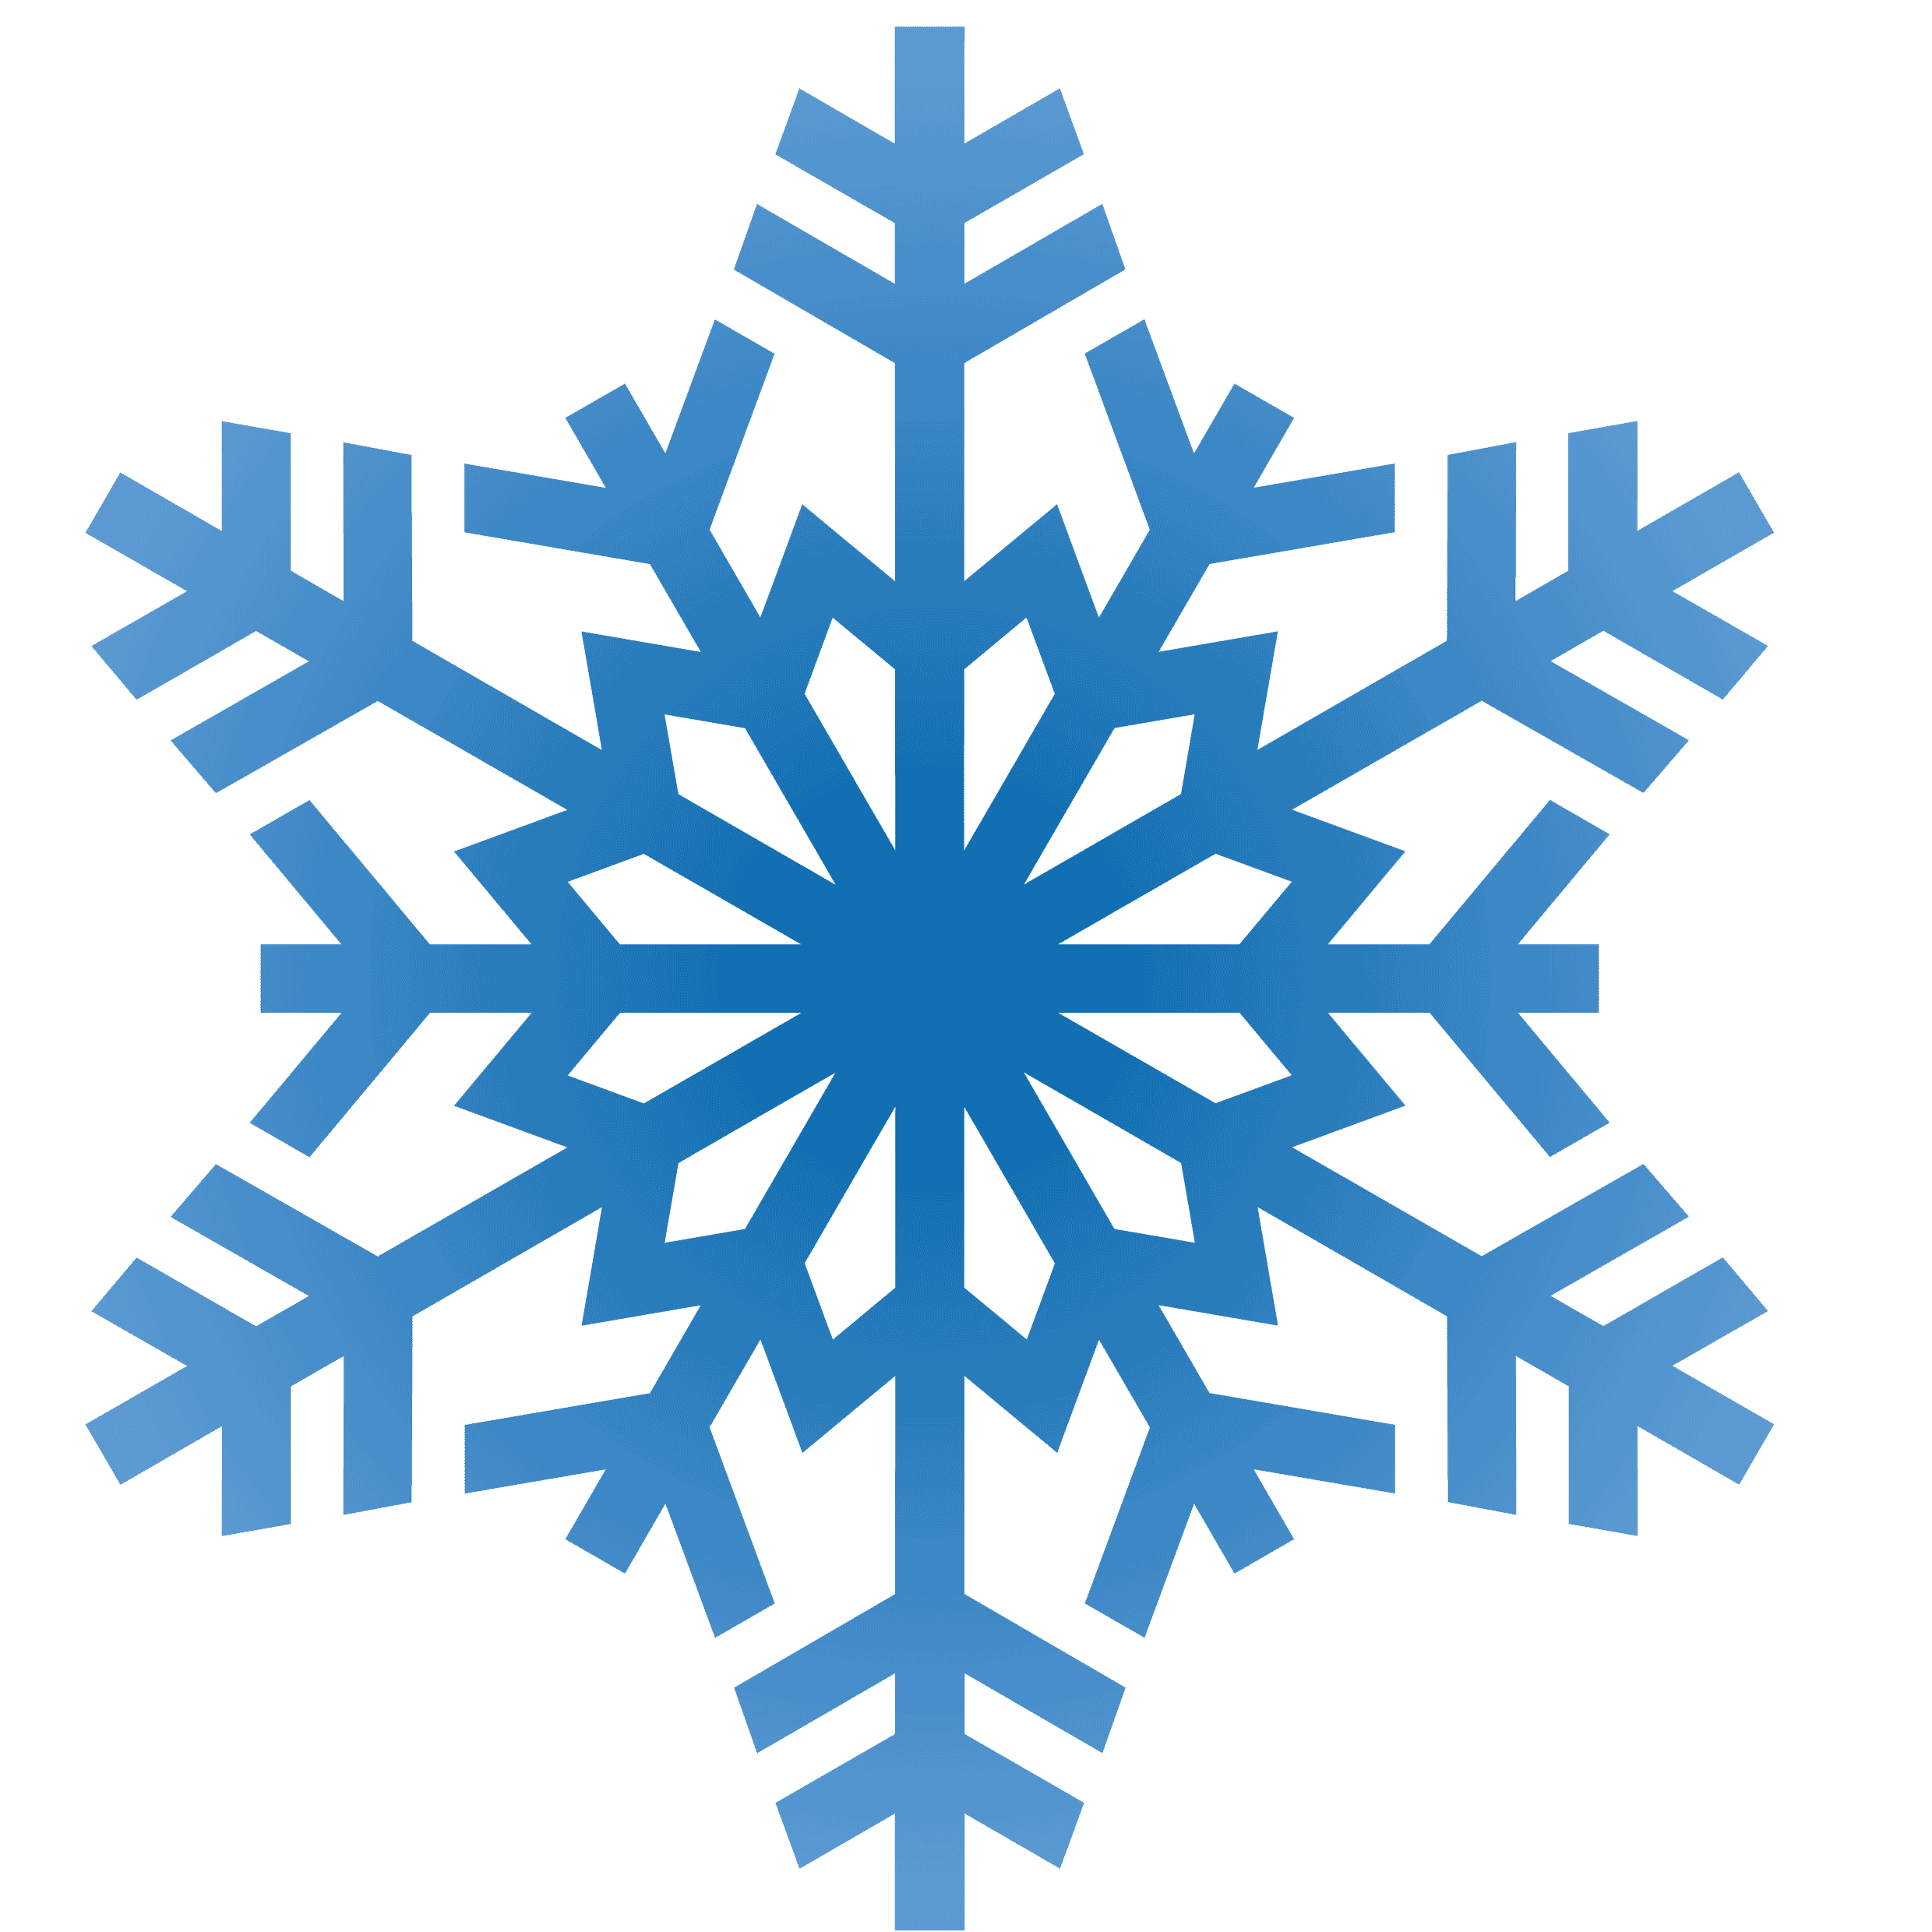 Background clipart library. Snowflakes snowflake transparent free